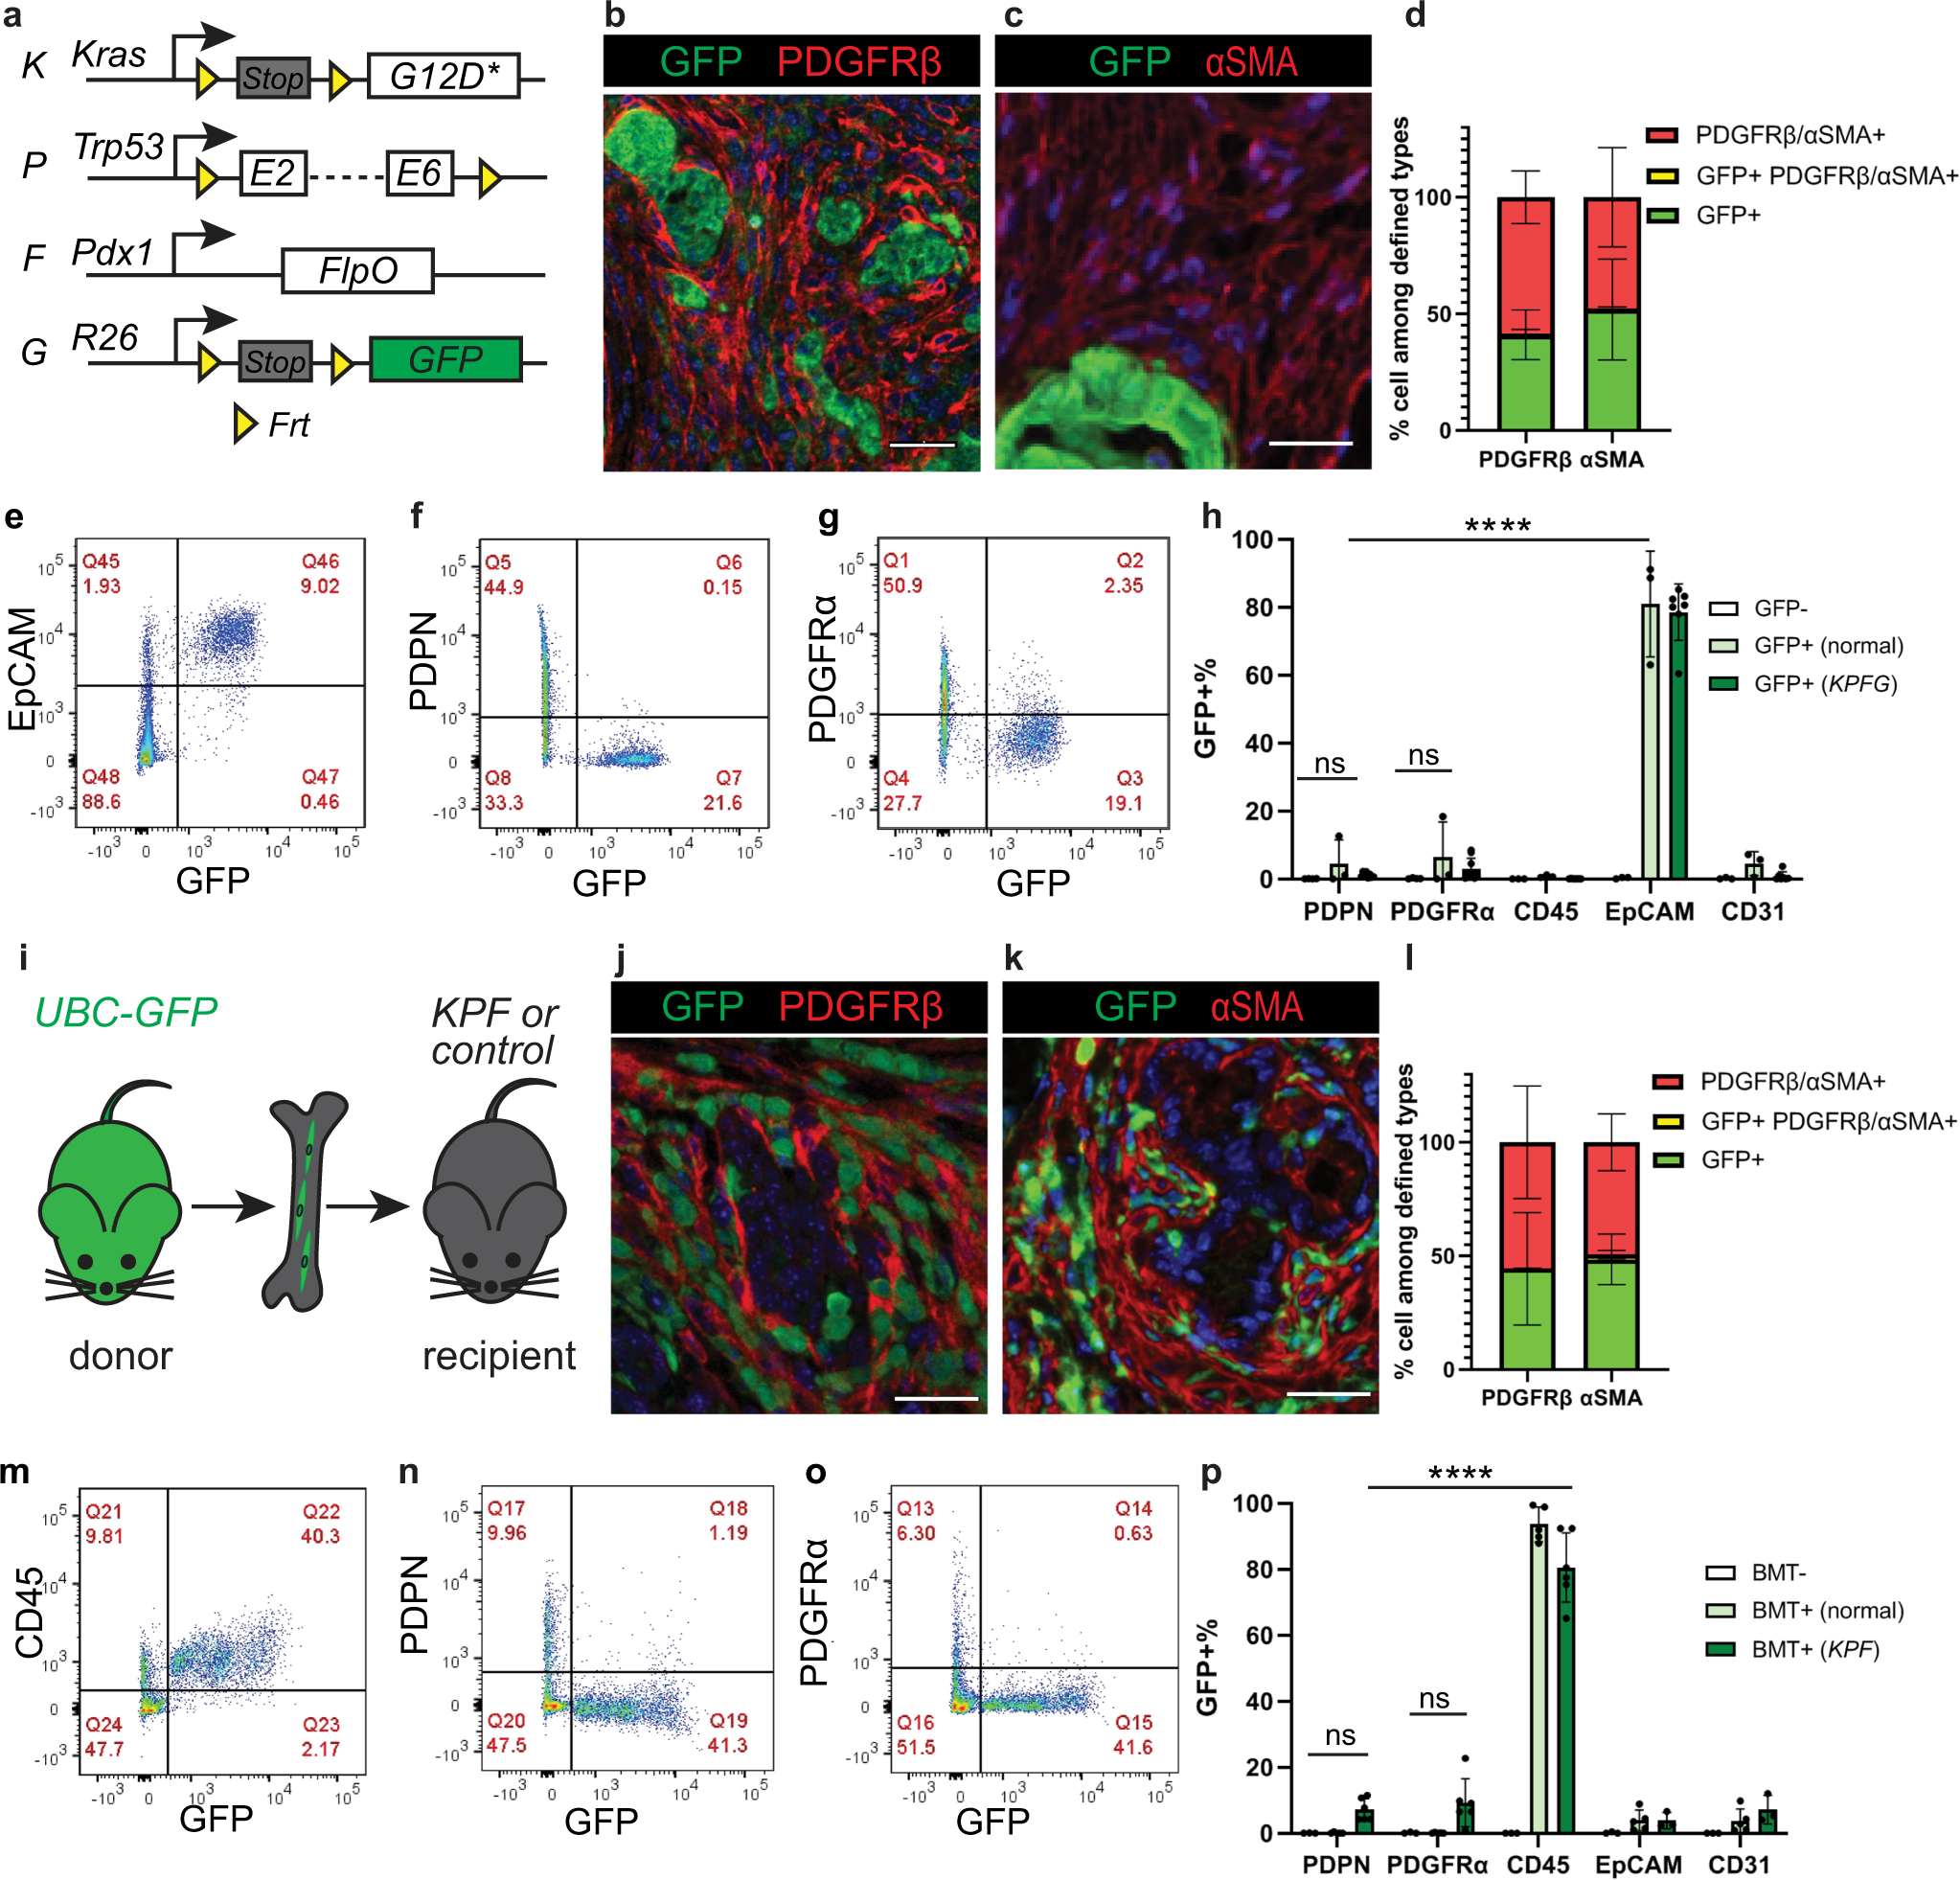 The splanchnic mesenchyme is the tissue of origin for pancreatic  fibroblasts during homeostasis and tumorigenesis | Nature Communications